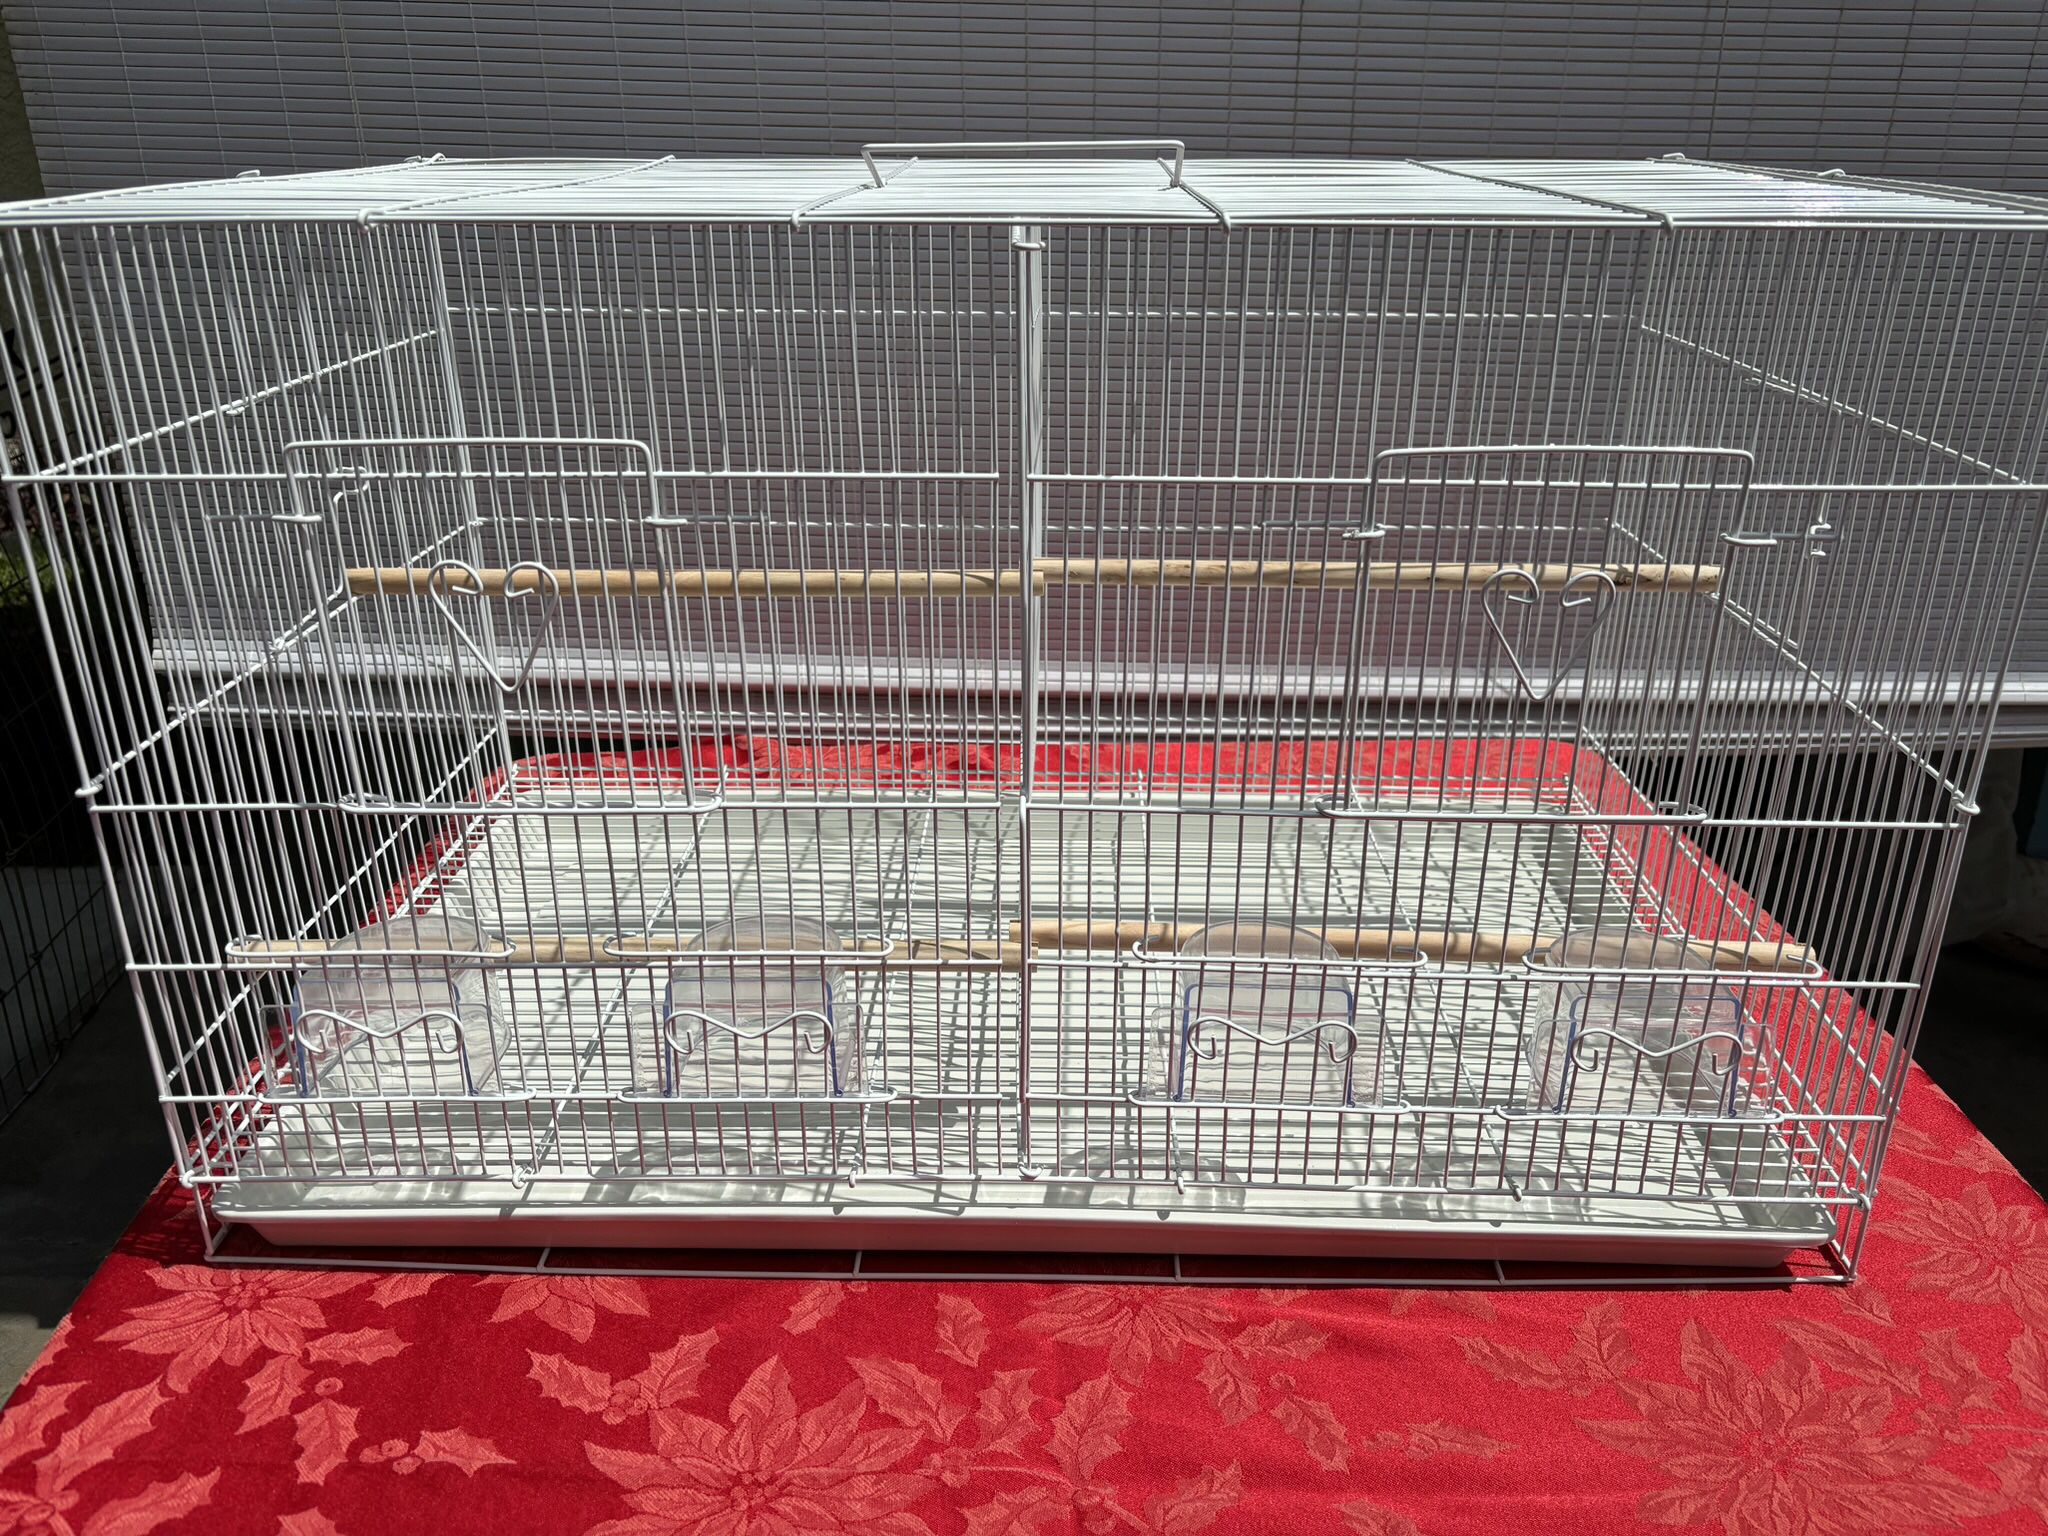 New Divided Bird Cages